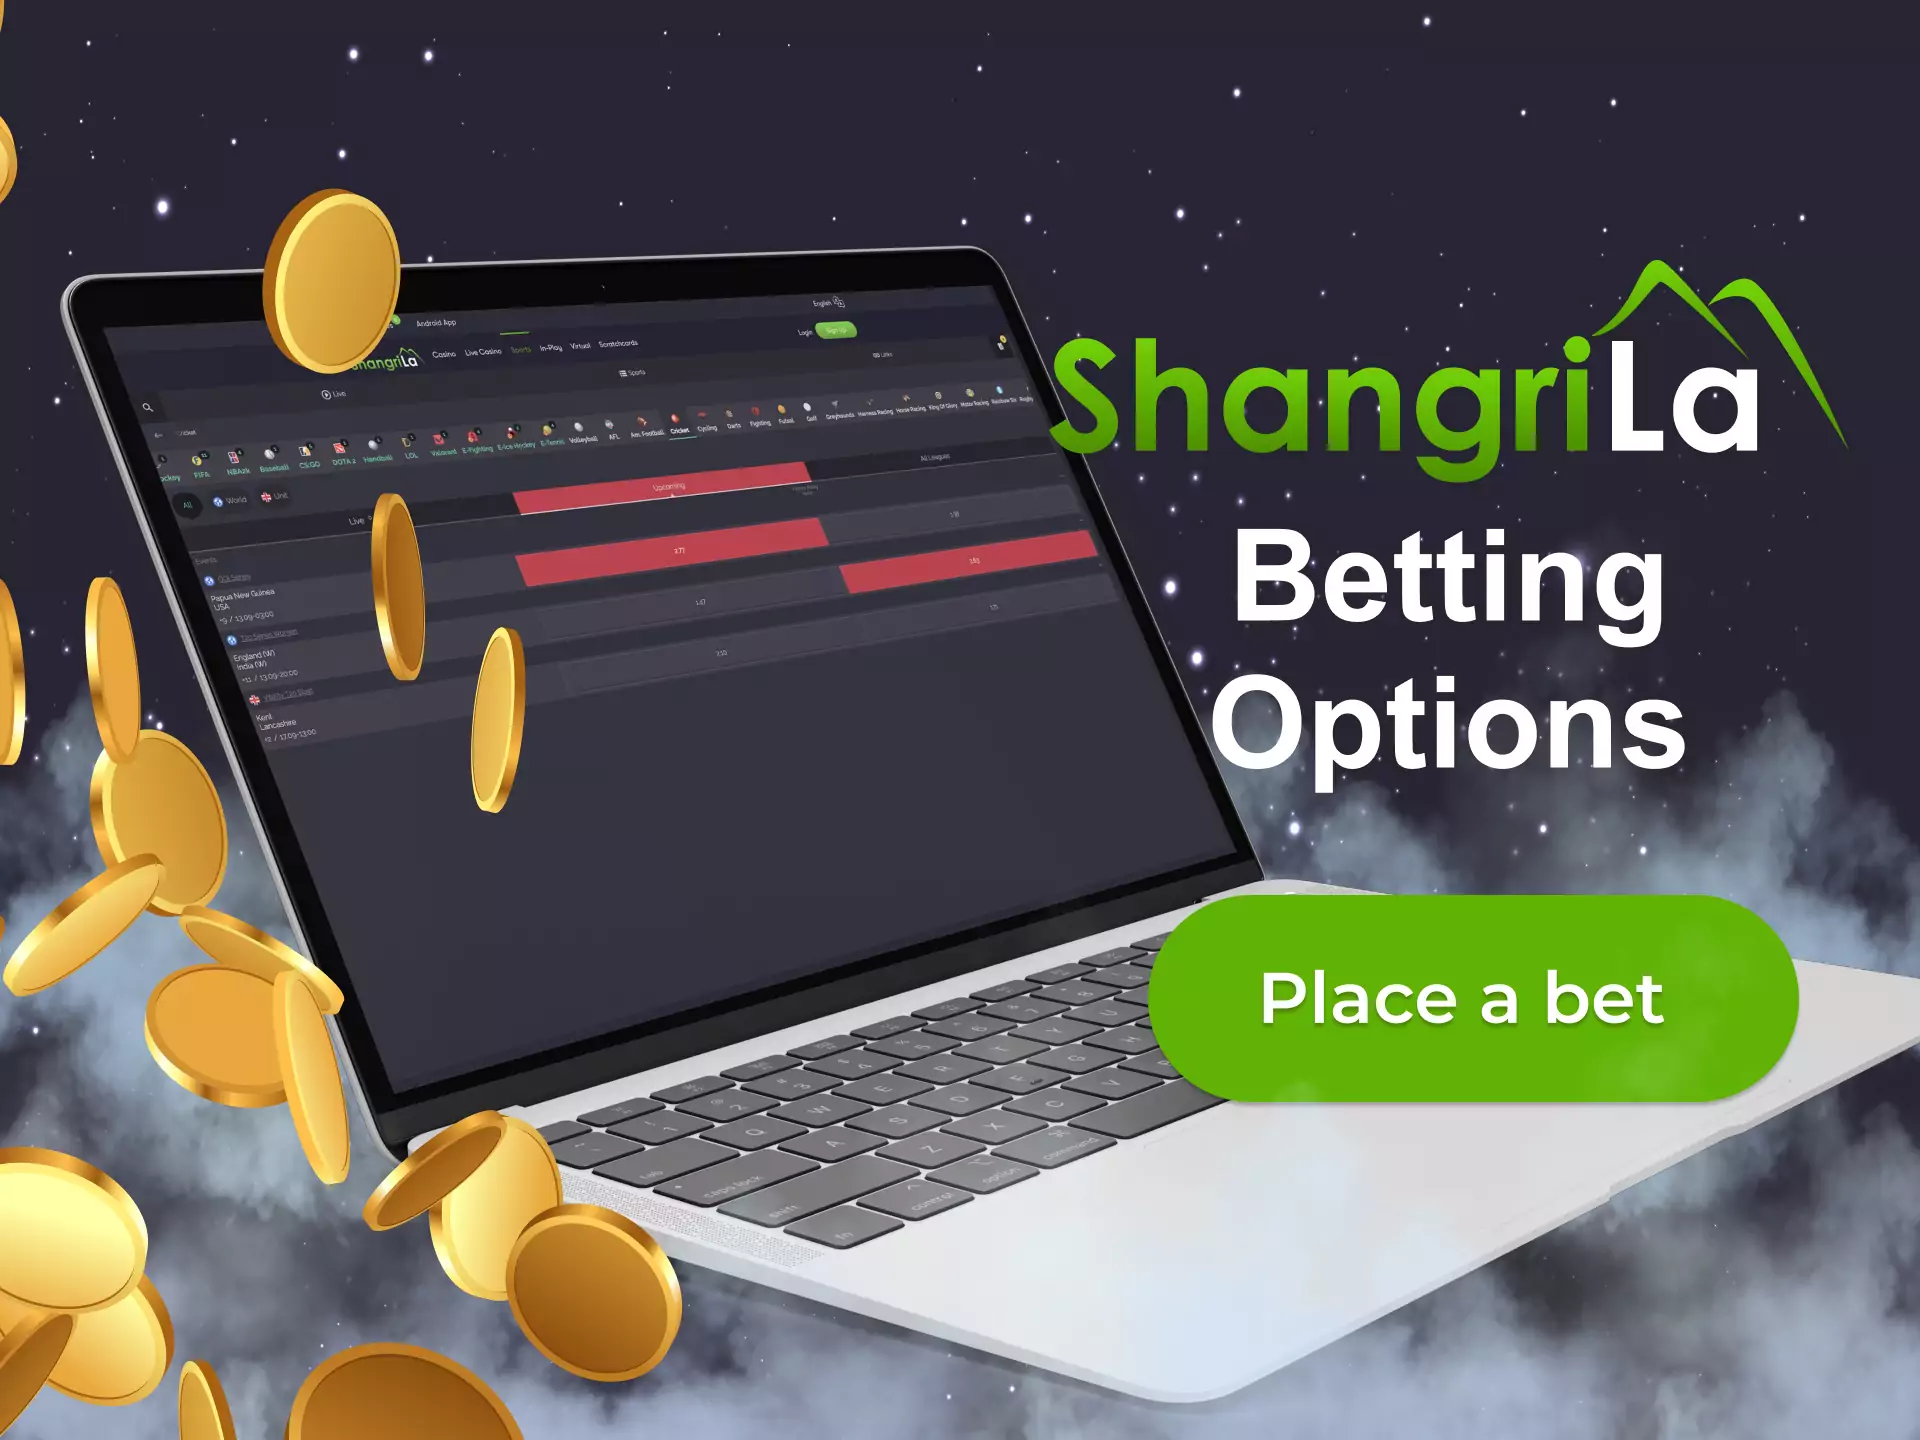 In the Shangri La sportsbook, users bet on live and line events.